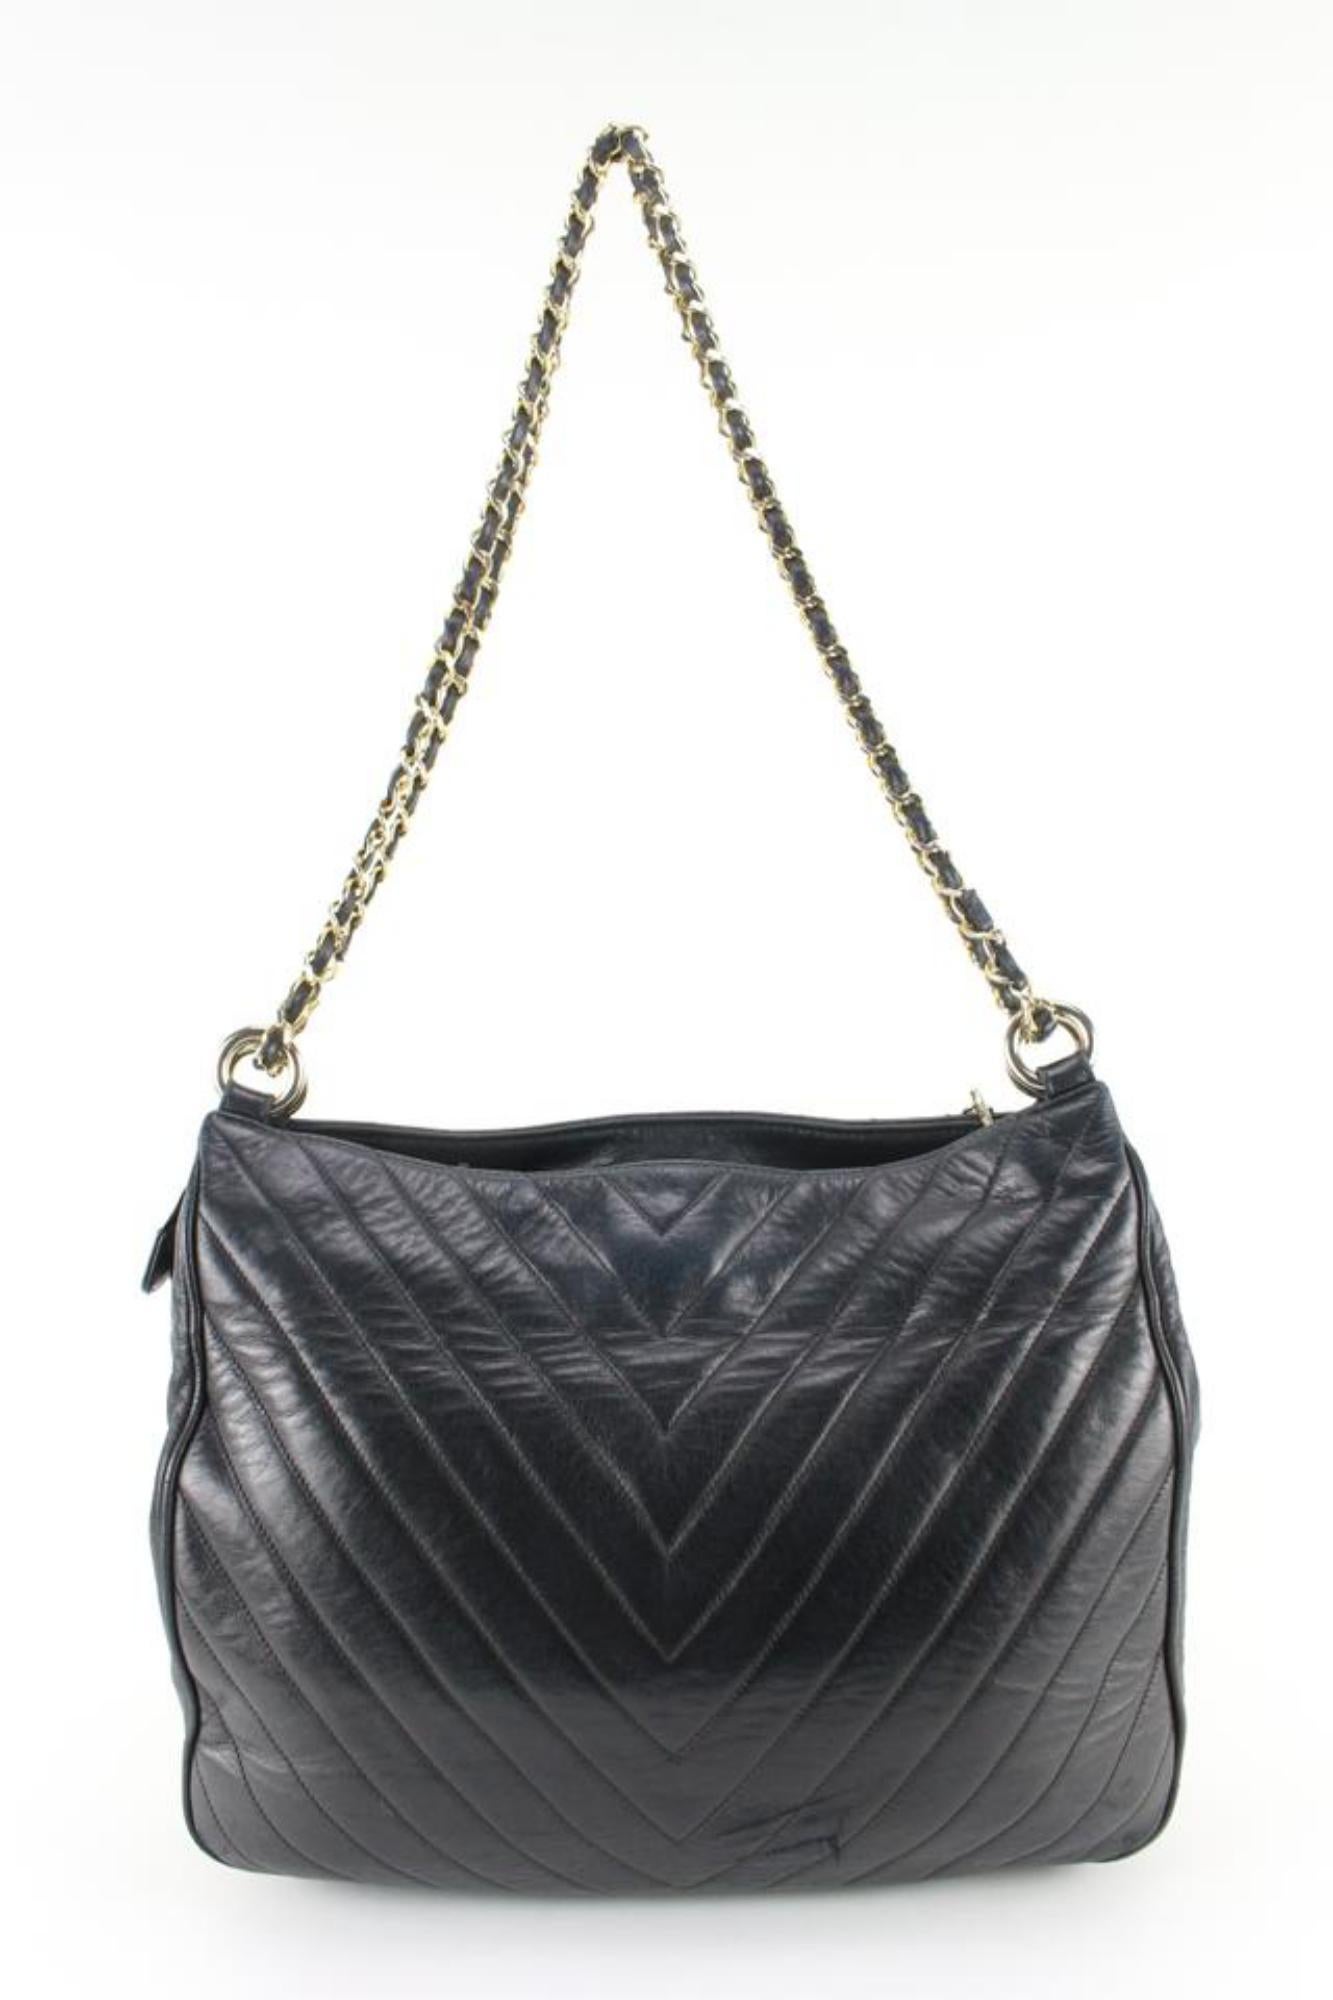 Chanel Quilted Chevron Lambskin Chain Shoulder Bag 60ck816s For Sale 5